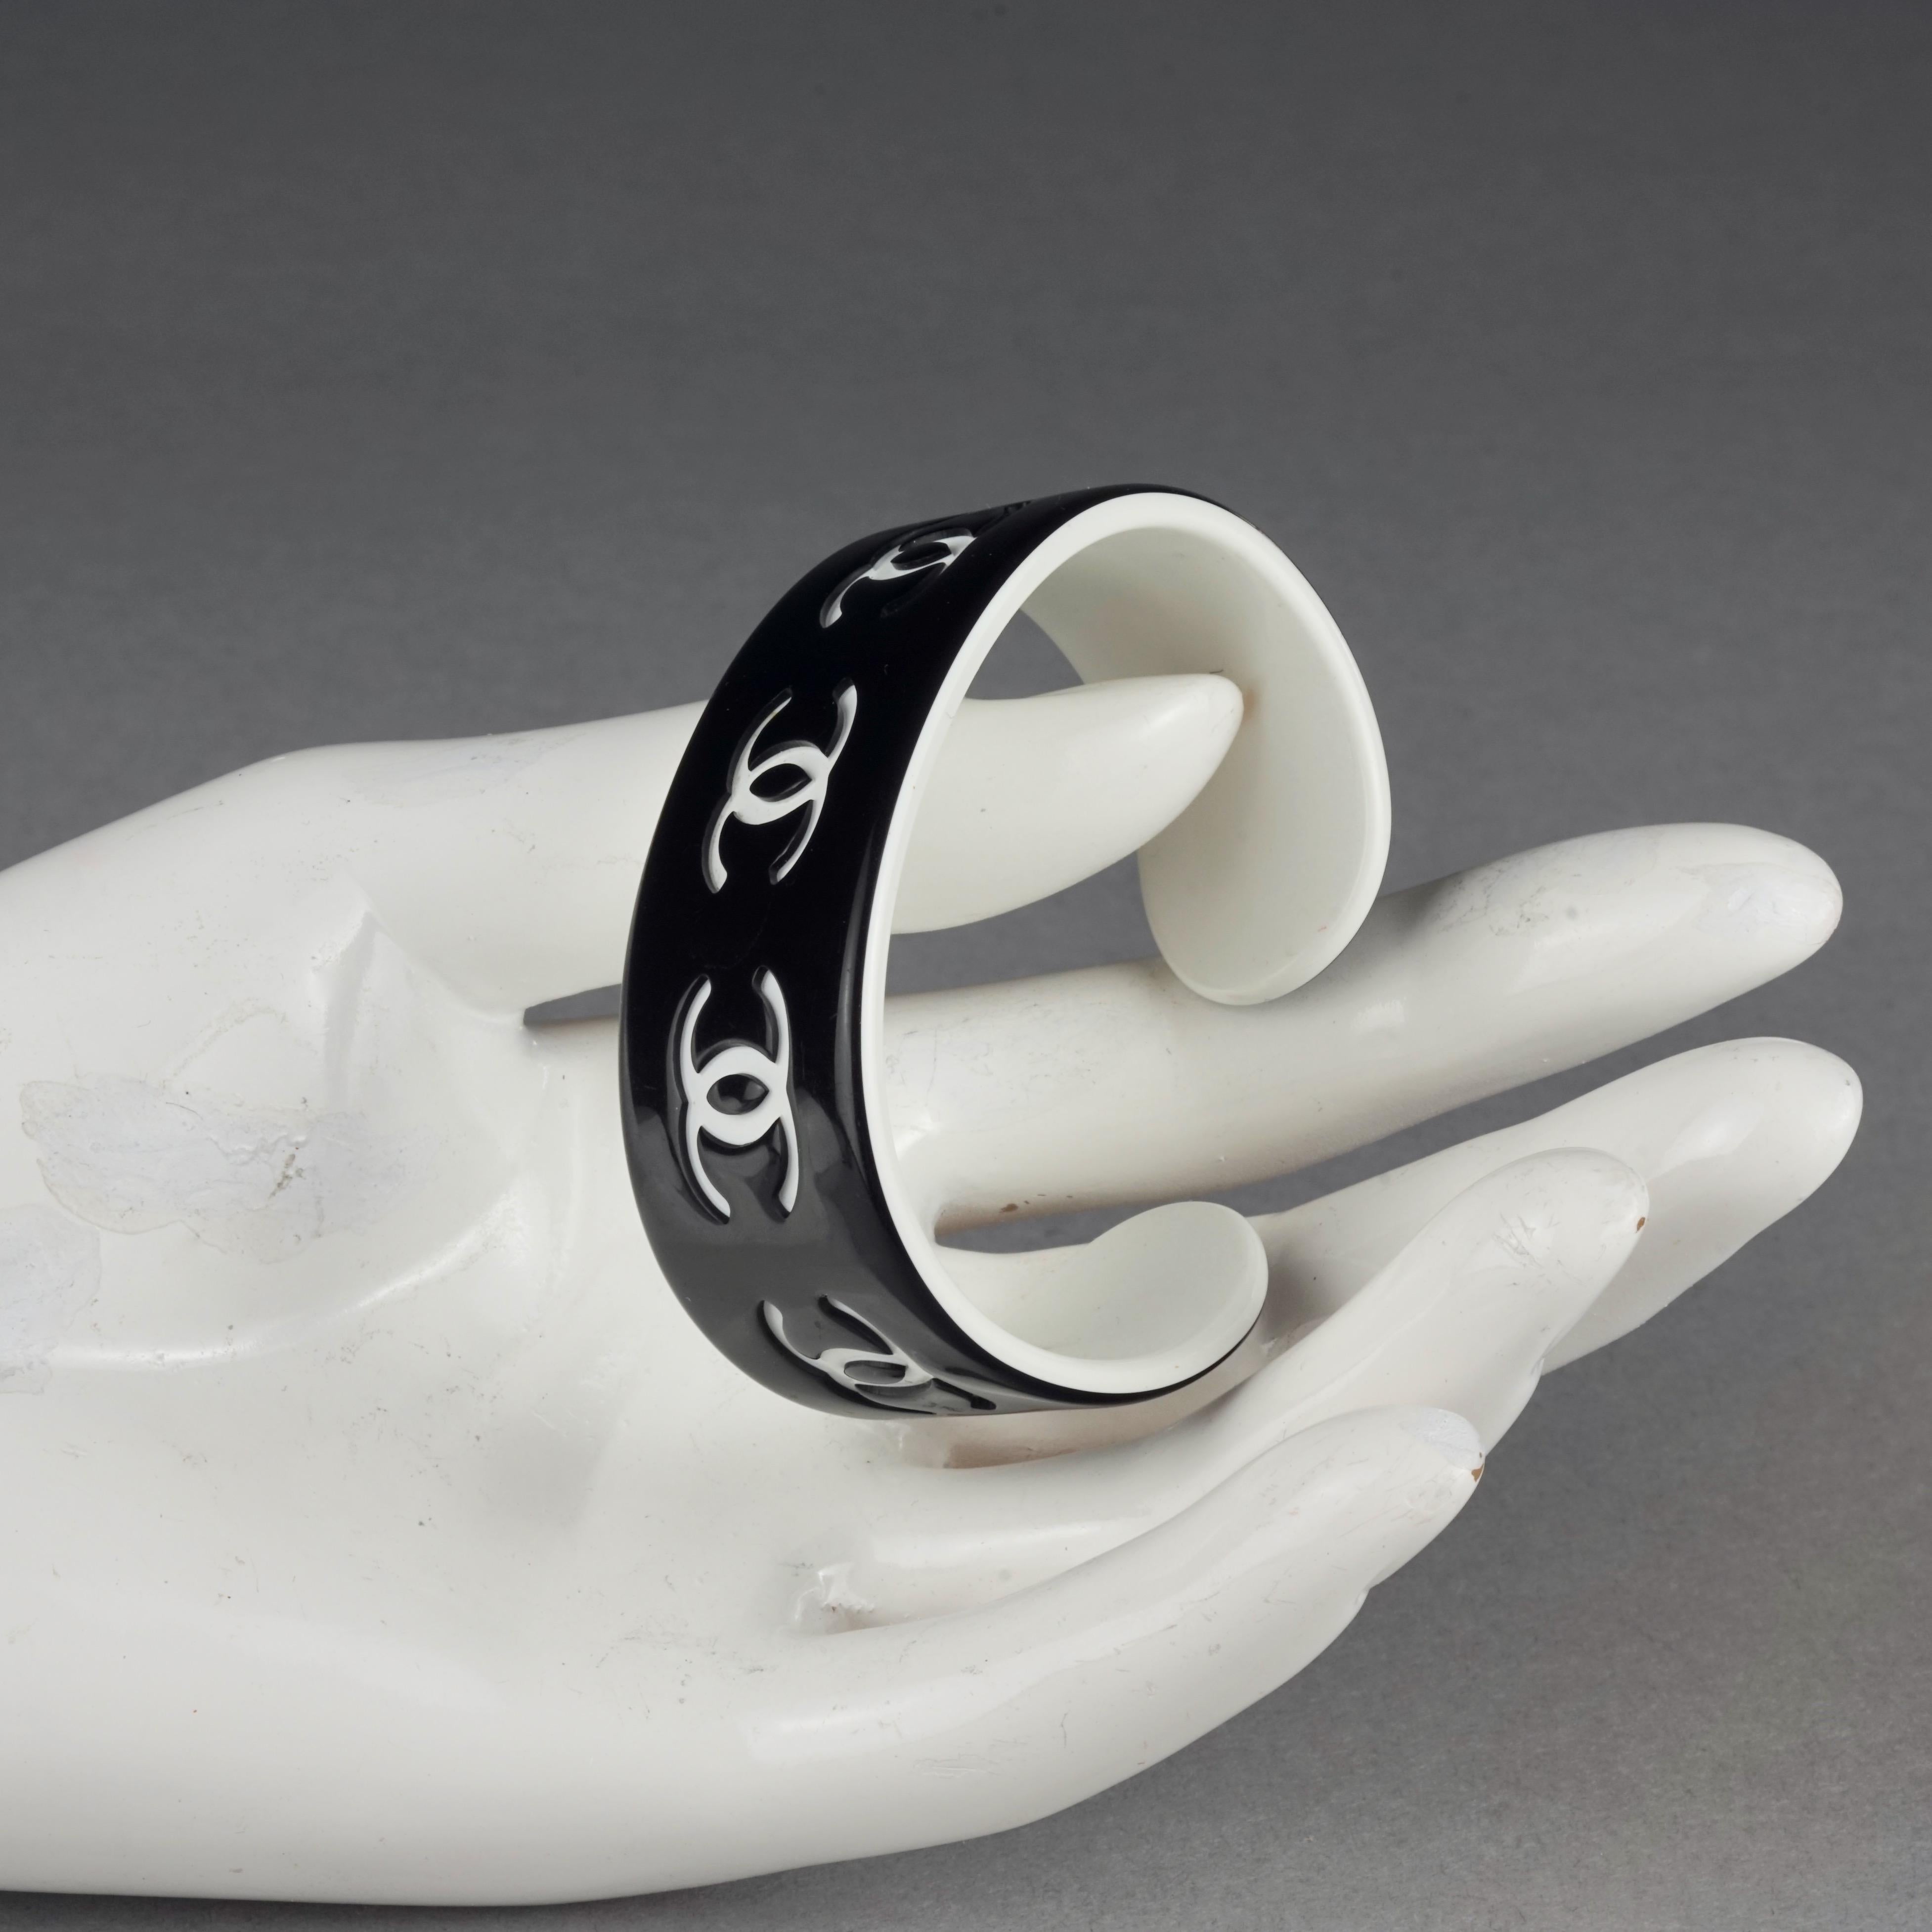 Vintage CHANEL 2002 Black and White CC Logo Perspex Cuff Bracelet In Excellent Condition For Sale In Kingersheim, Alsace